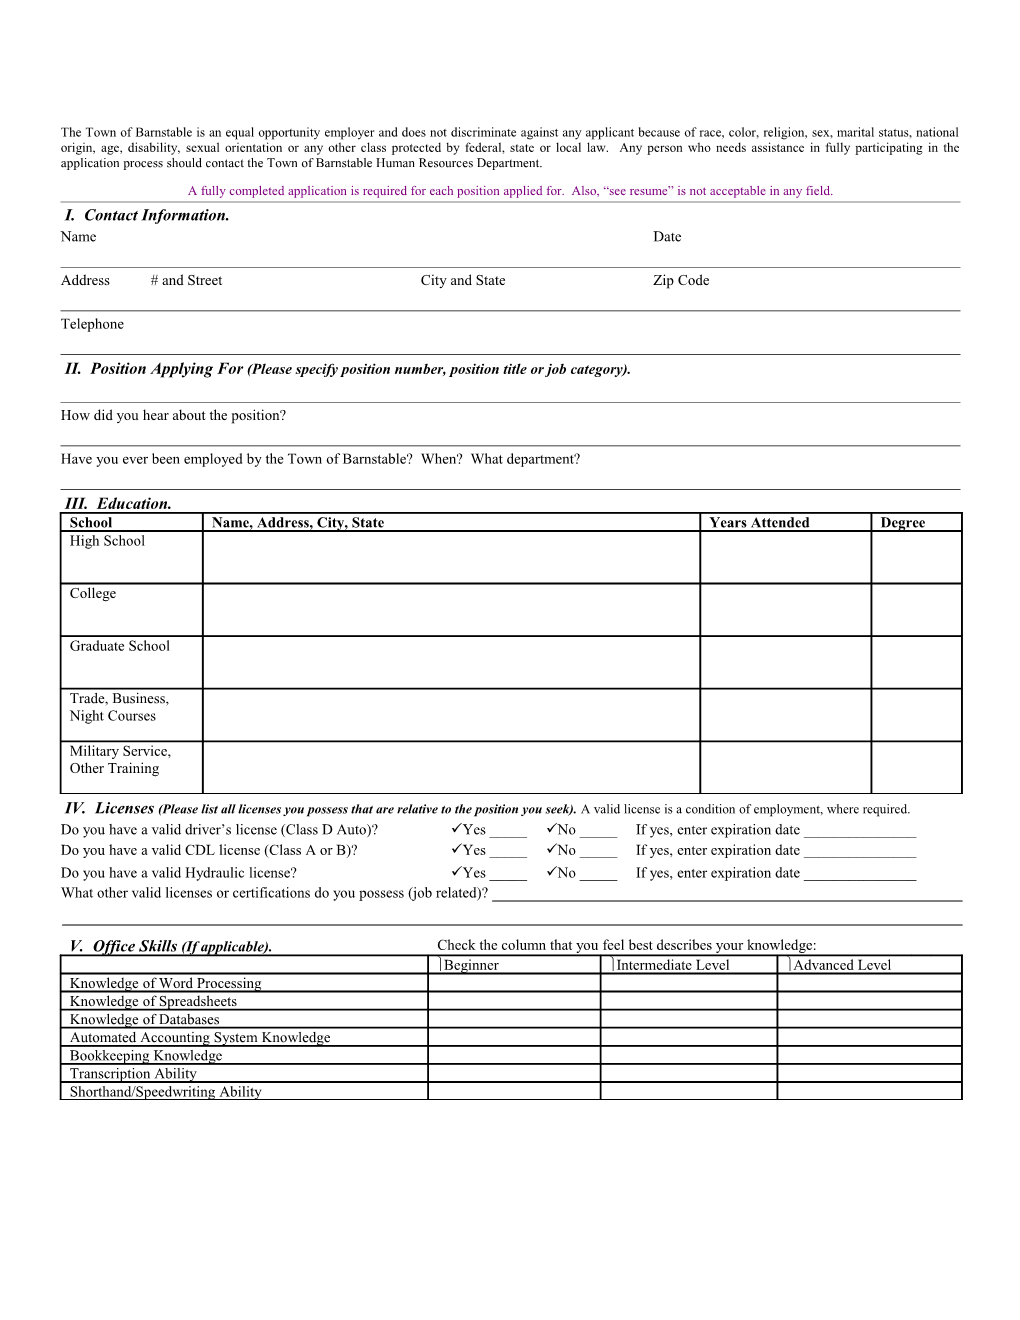 Town of Barnstable Employment Application